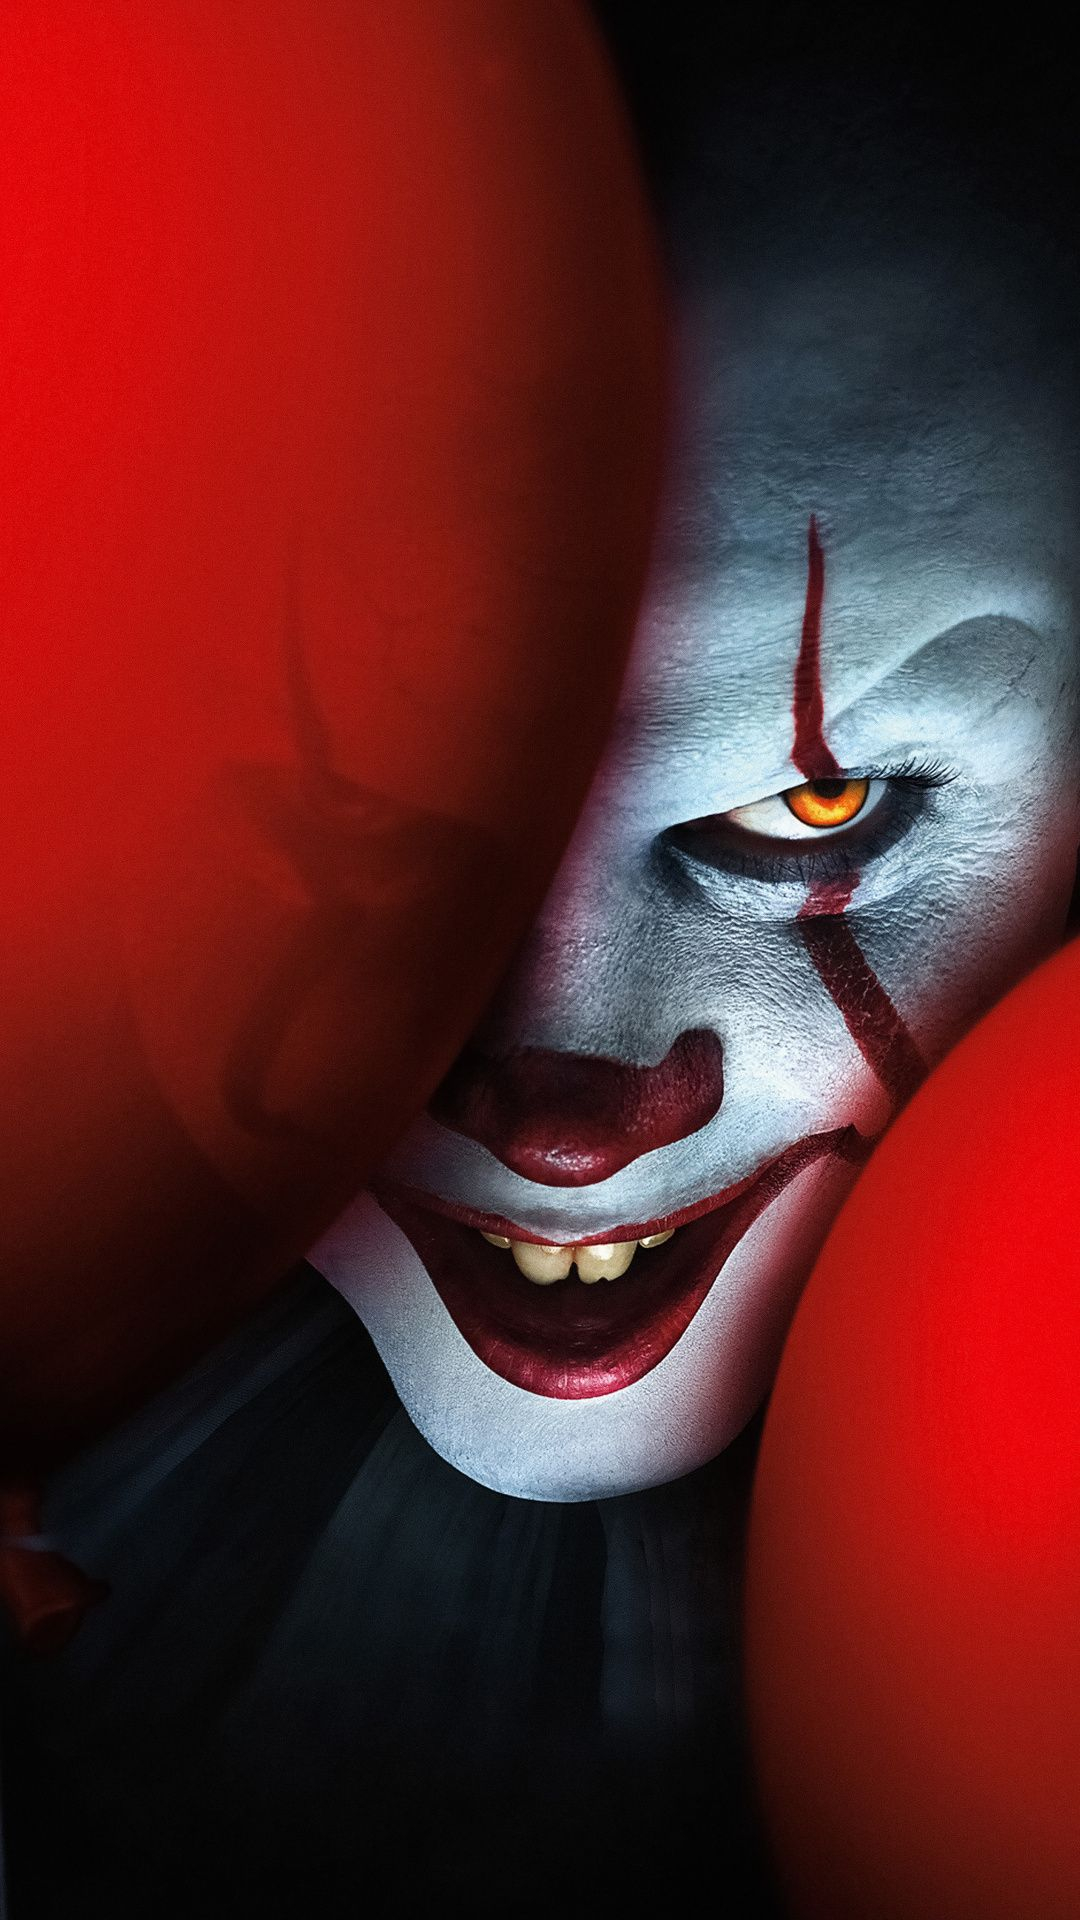 1080x1920 IT chapter two, clown, Pennywise, 2019 movie wallpaper | Joker hd wallpaper, Creepy faces, Pennywise the clow